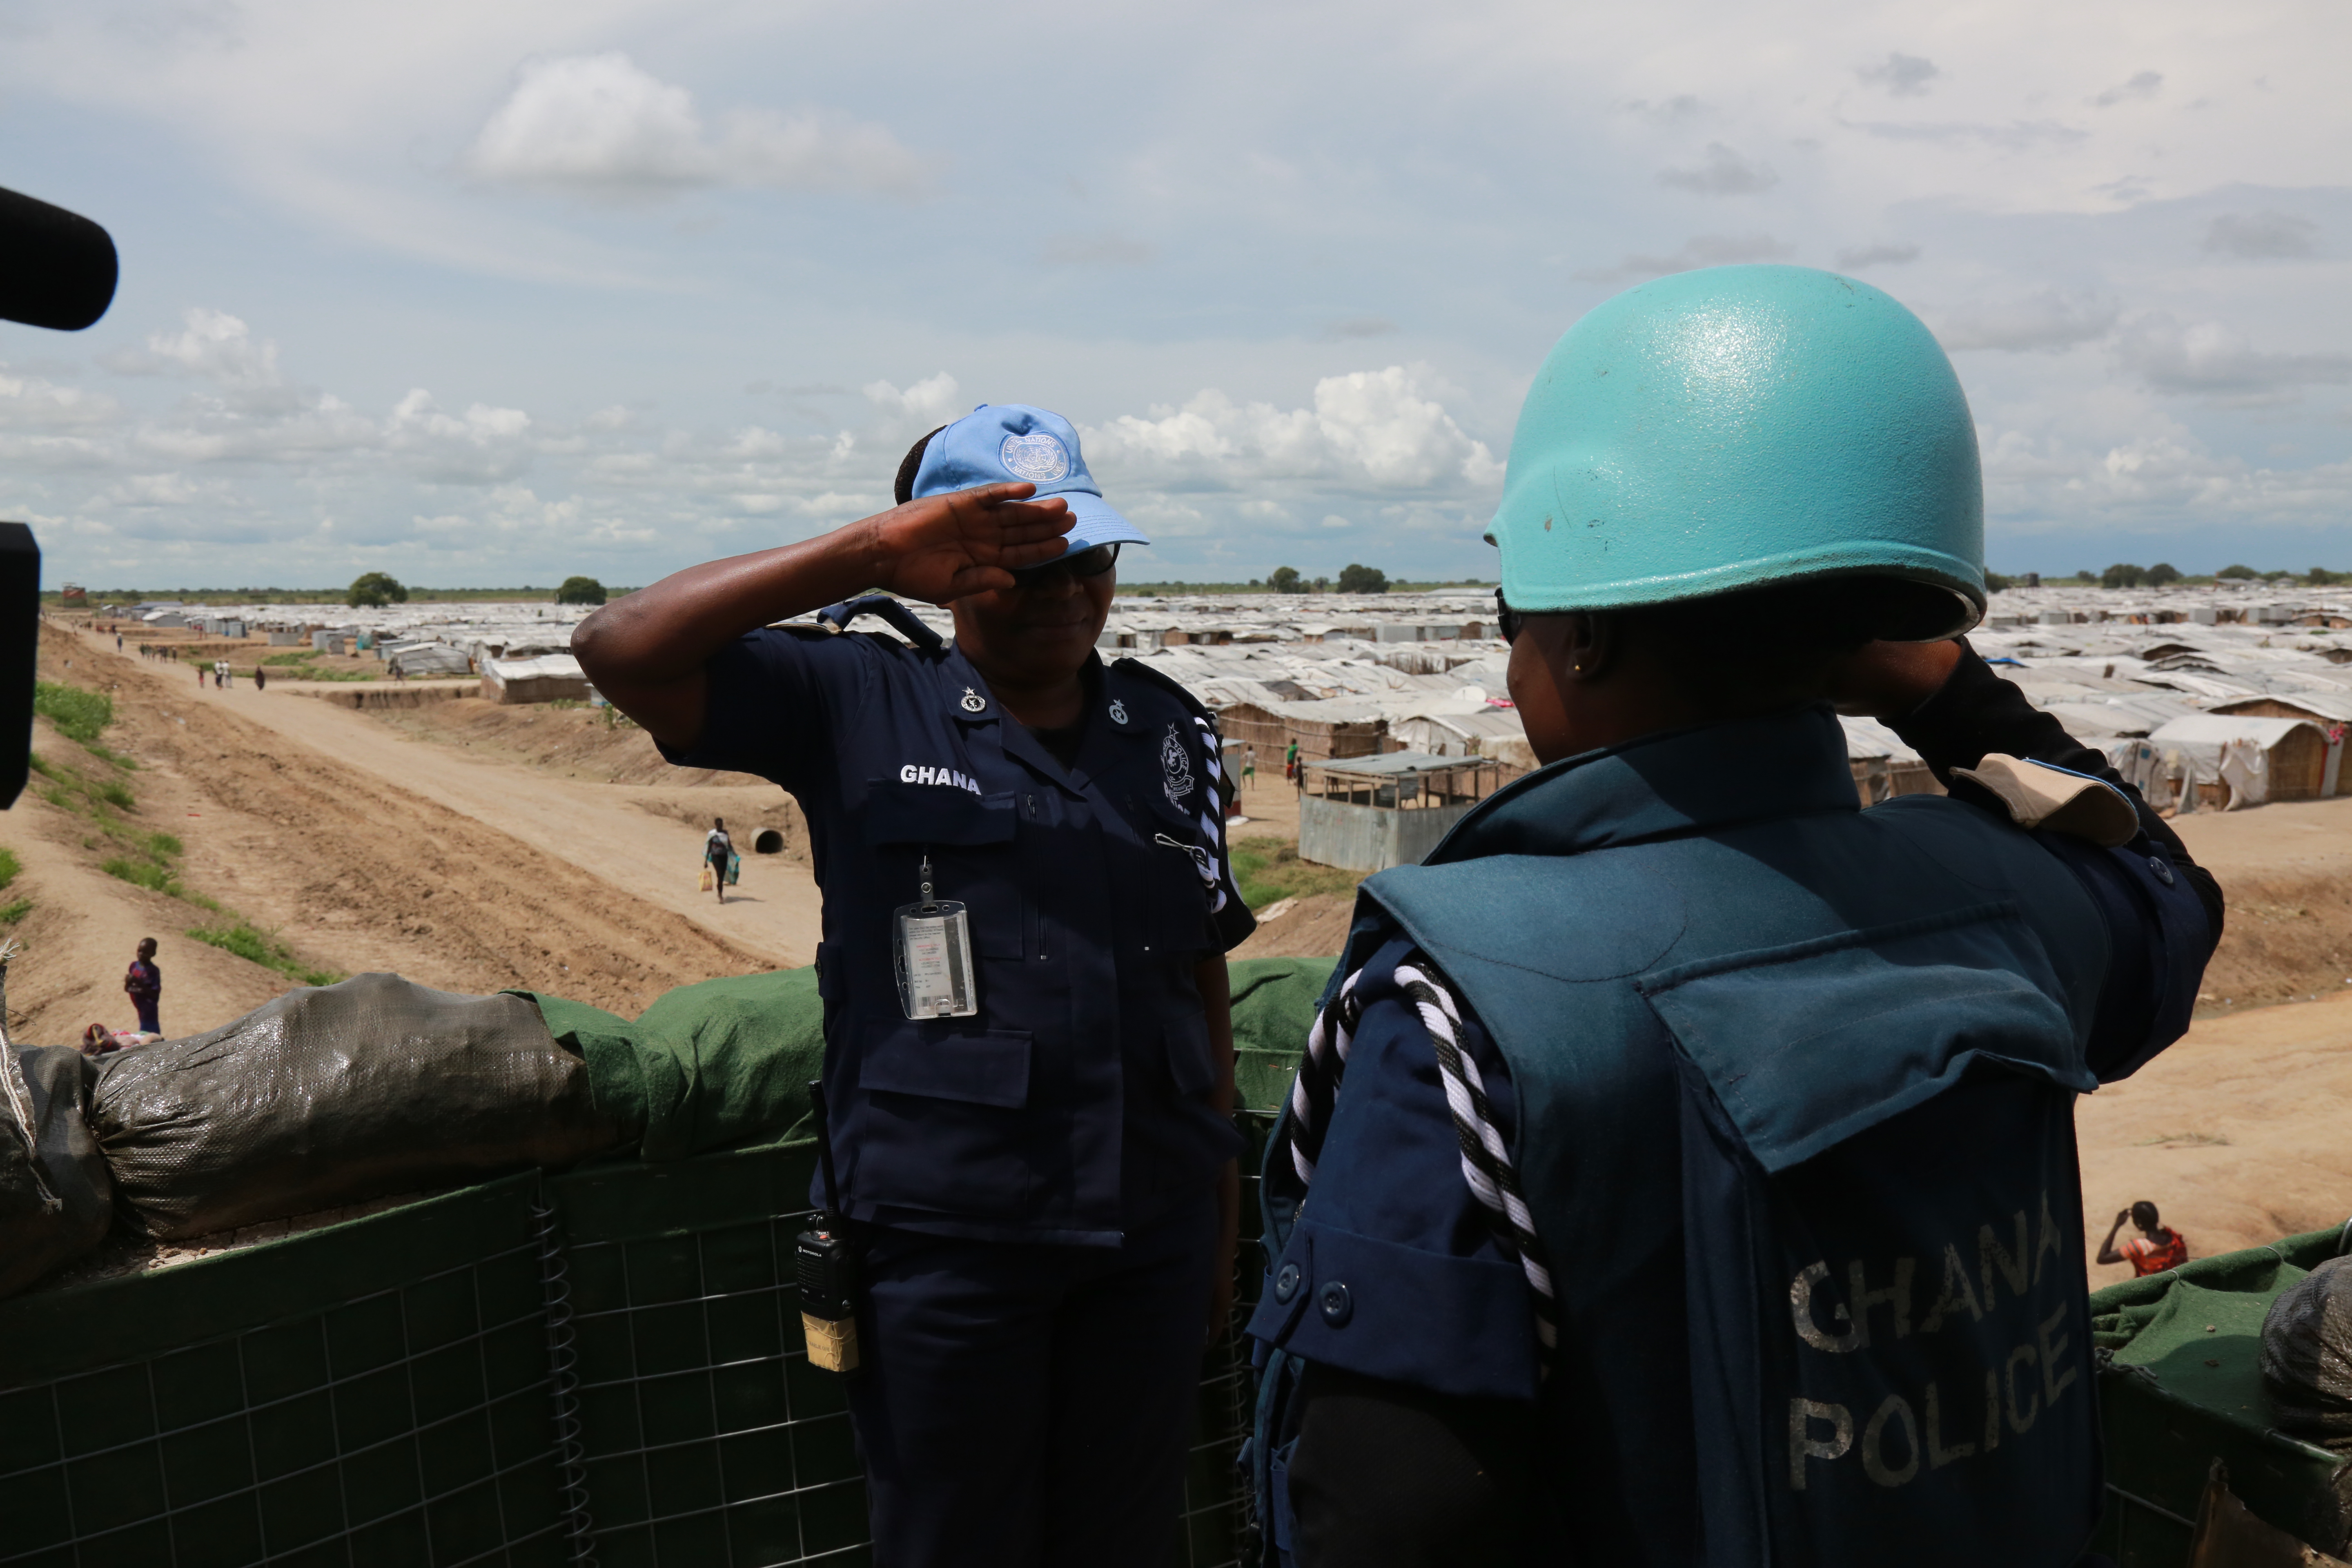 Assistant Superintendent of Police, Sylivia Adzo Sowlitse, salutes one of the officers under her command. Photo: UNMISS